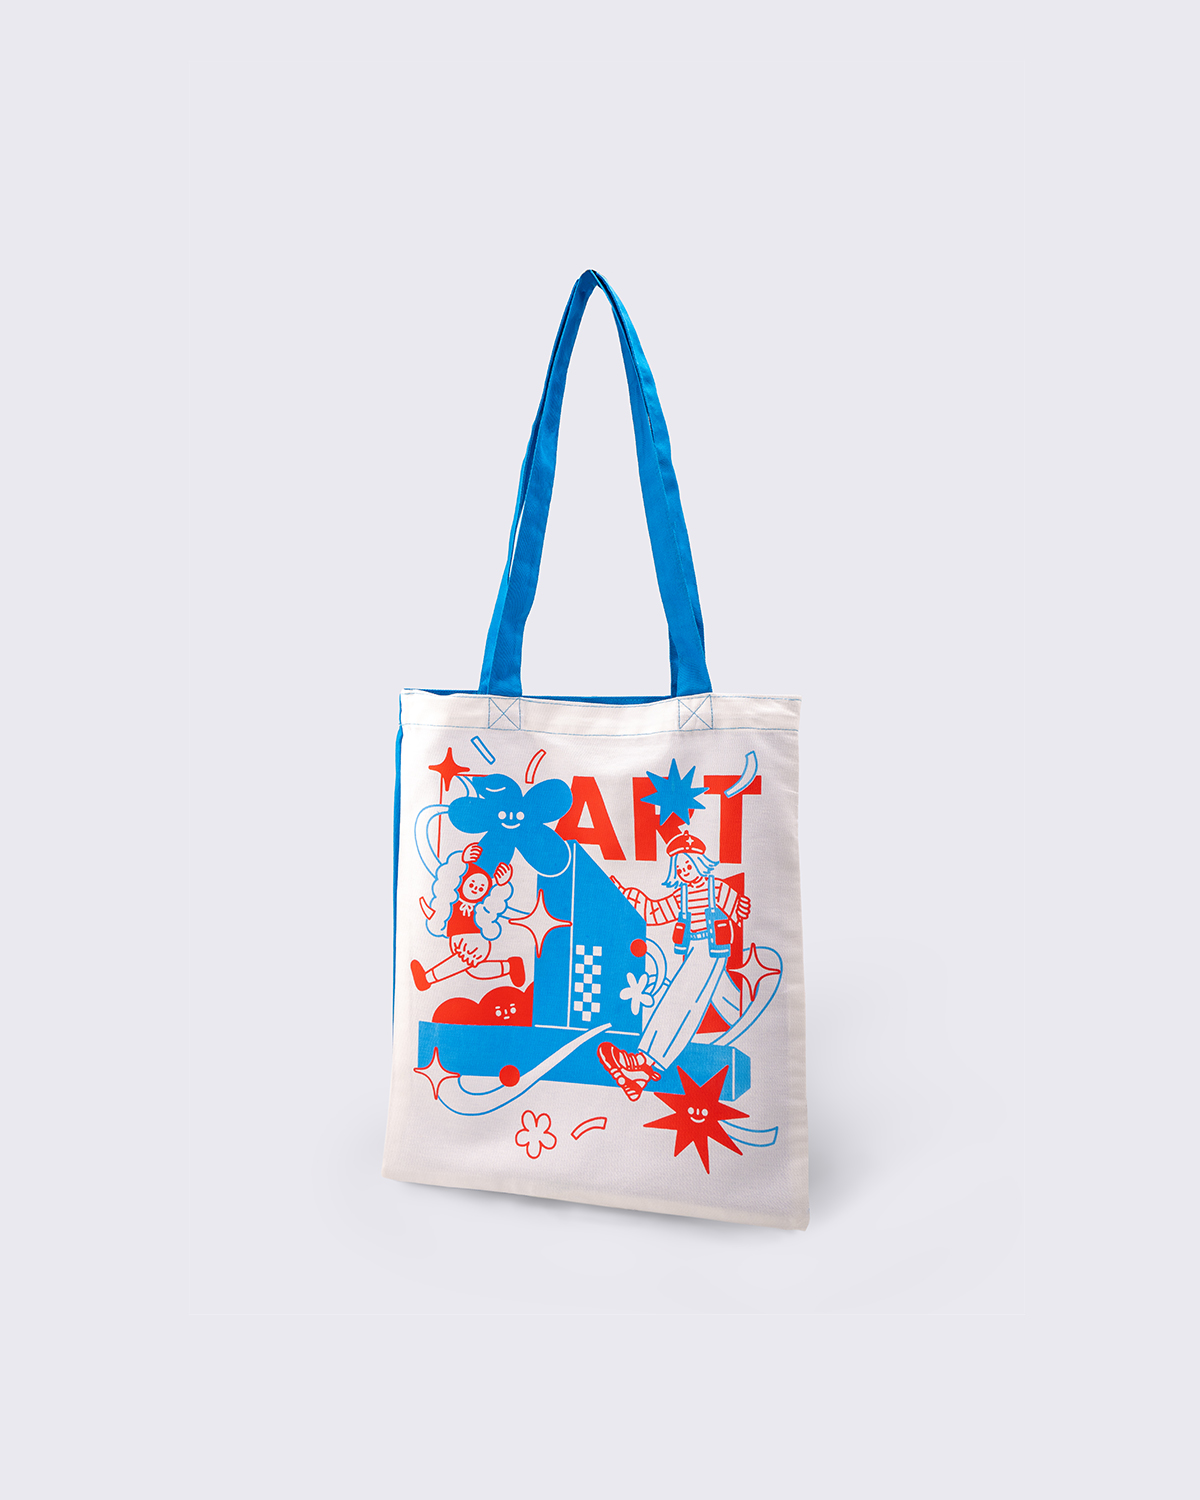 M+ x THE WEIRD THINGS Tote Bag